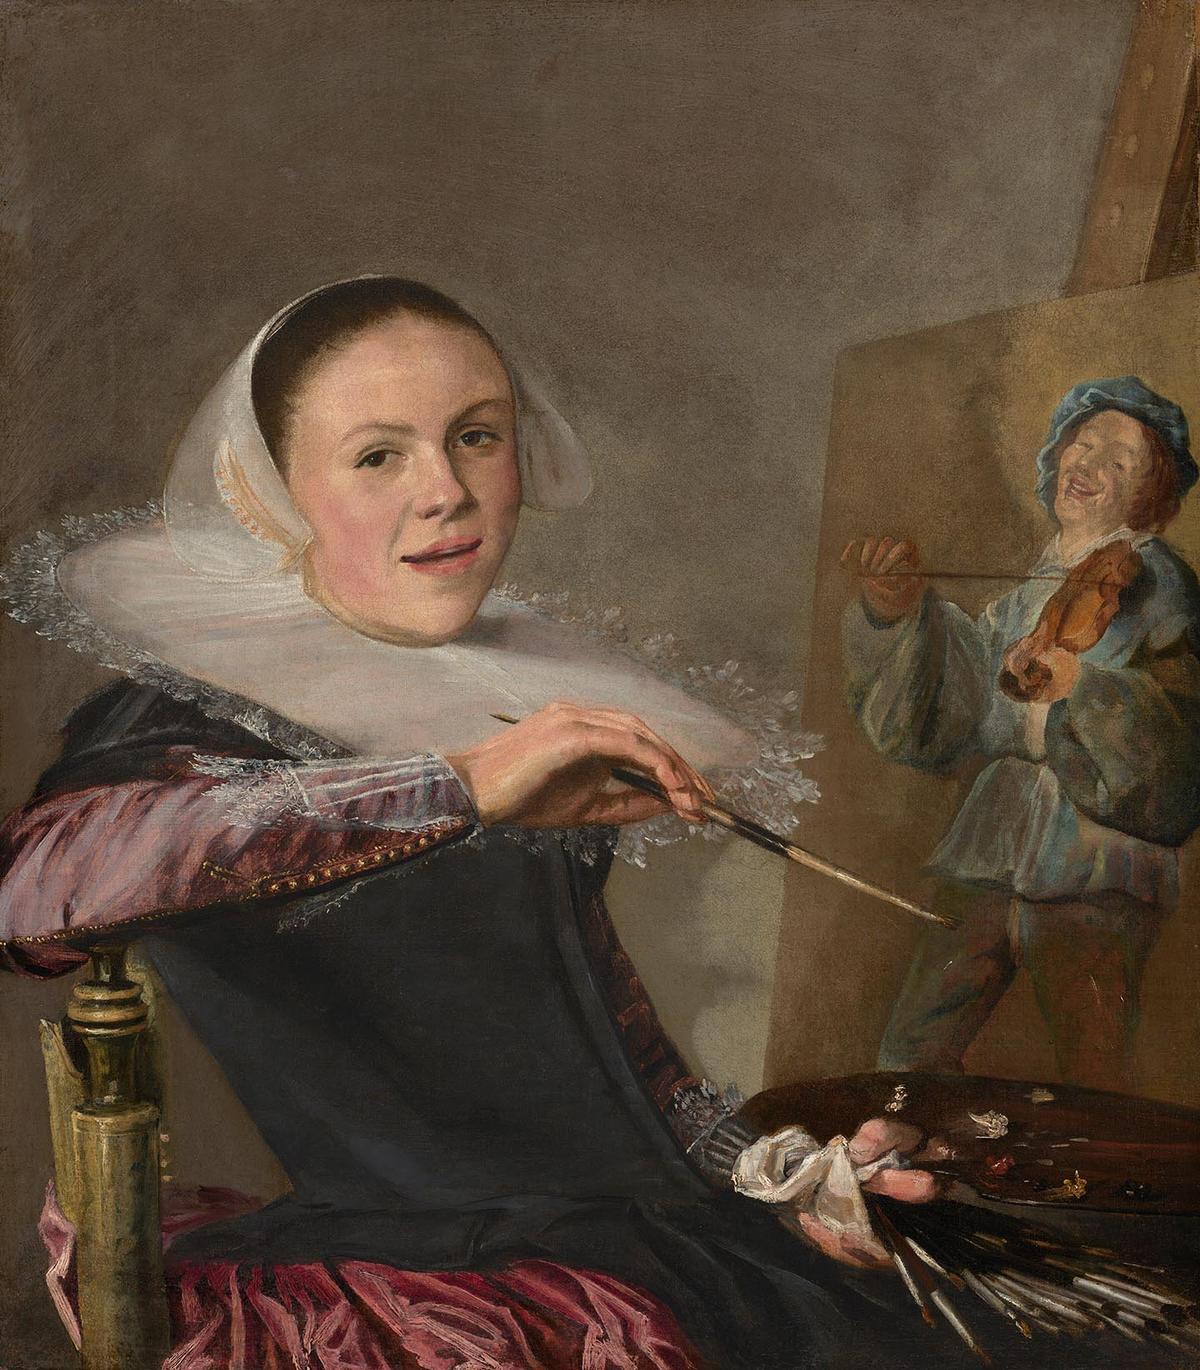 Self-portrait, circa 1633, by Judith Leyster. Oil on canvas; 29 1/3 inches by 25 3/5 inches. National Gallery of Art, Washington, D.C. (Courtesy of Baltimore Museum of Art)